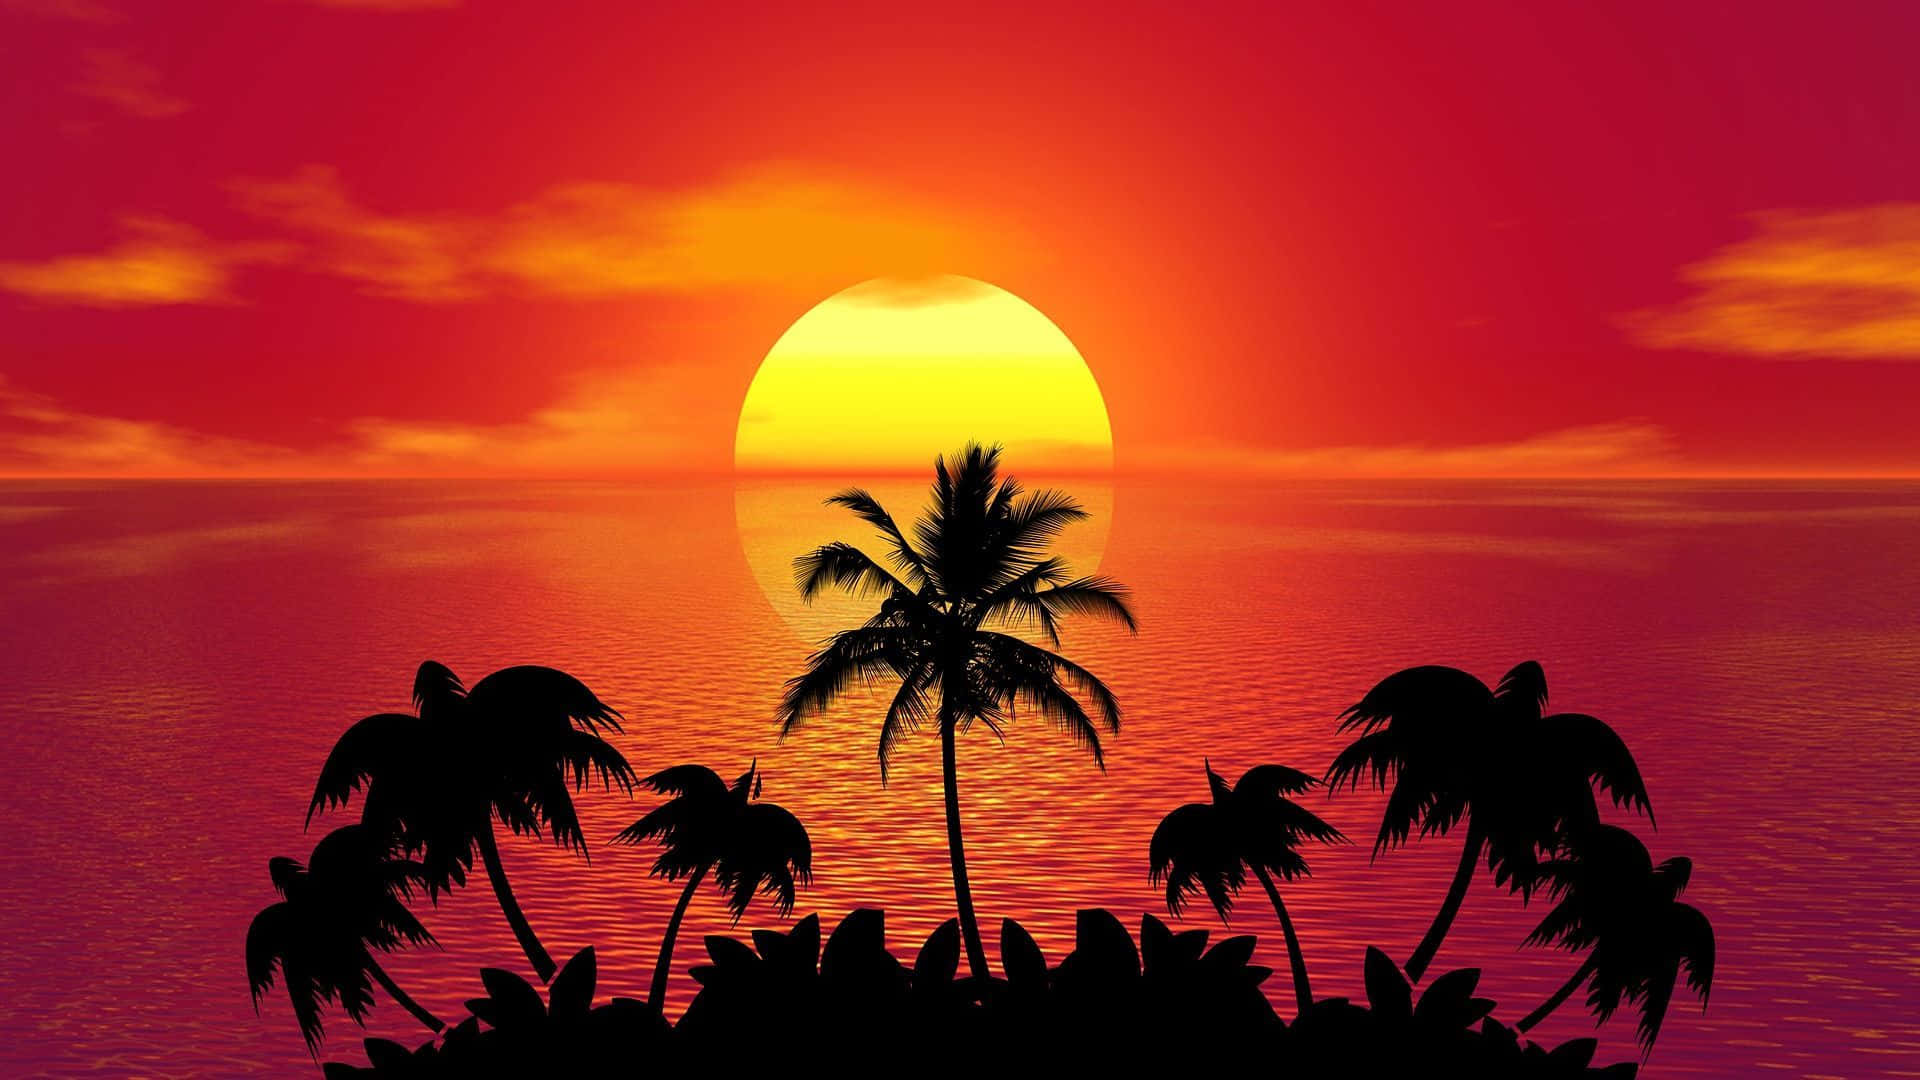 Enjoy the beautiful colors of the sunset from the beach.